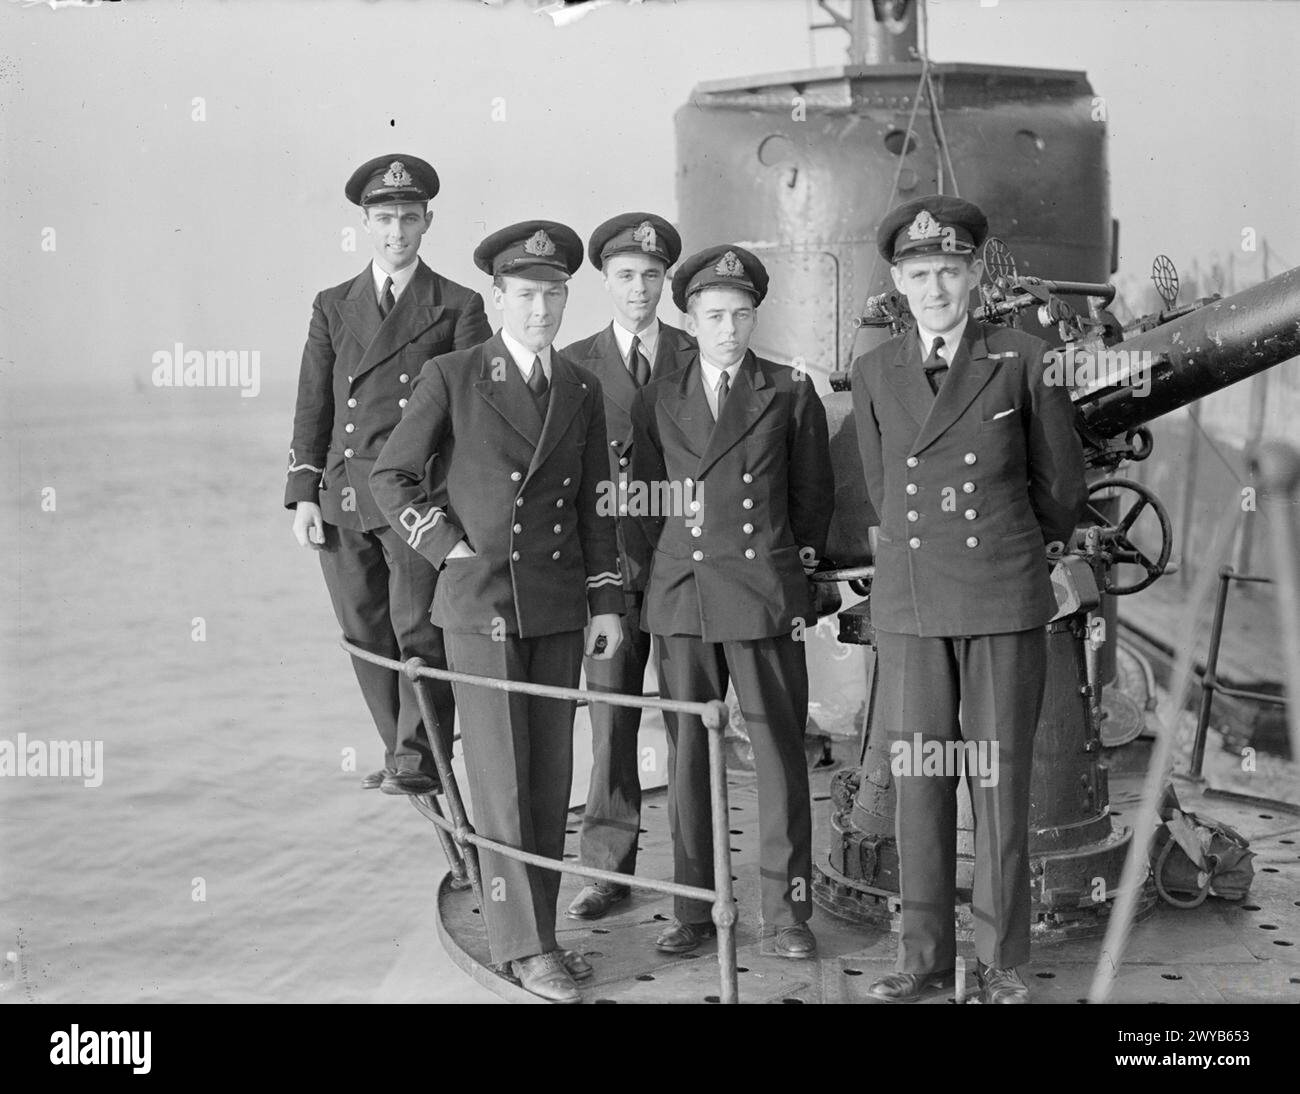 HMS SUBMARINE SHAKESPEARE, OF SICILY LANDING FAME, BACK HOME. 5 JANUARY 1943, DEVONPORT. THE SUBMARINE RETURNS AFTER 19 MONTHS OPERATIONAL ACTIVITY IN THE MEDITERRANEAN. - Officers of the SHAKESPEARE. Left to right: Sub Lieut R G Pearson, RNVR, of Hitchin, Herts (Torpedo Officer); Lieut W E Little-John, DSC, RANVR, of Melbourne, Australia (First Lieutenant); Lieut N D Campbell, RN,, of Sevenoaks (Gunnery Officer); Lieut L H Richardson, RN, of Jersey, Channel Islands (Navigating Officer); and Lieut M F R Ainslie, DSO, DSC, RN, of Ash Vale, Surrey (Commanding Officer). , Stock Photo